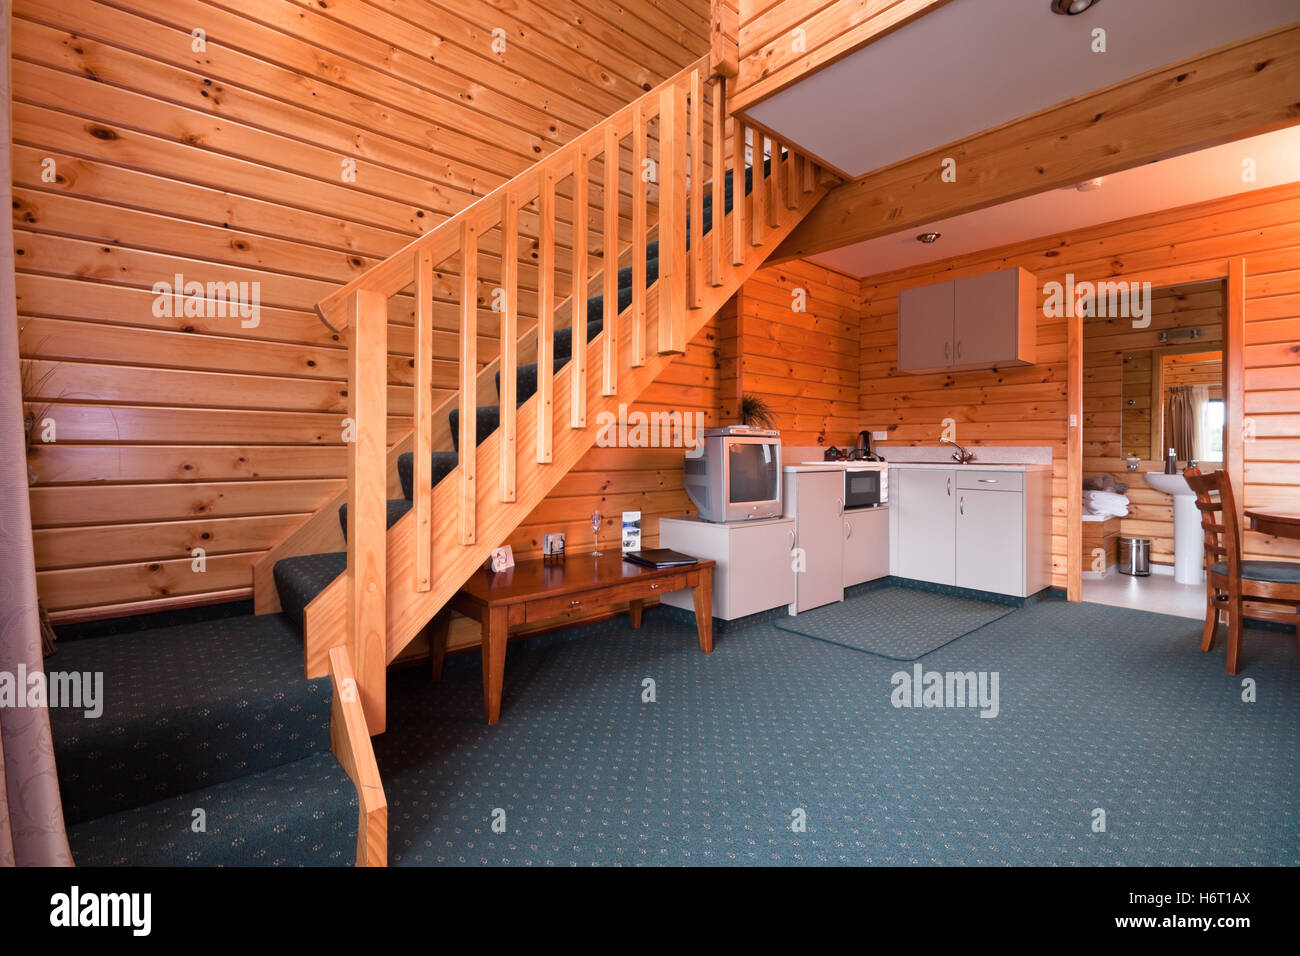 room interior hotel cabin wooden home flat apartment lodge stairs house building beautiful beauteously nice detail inside Stock Photo